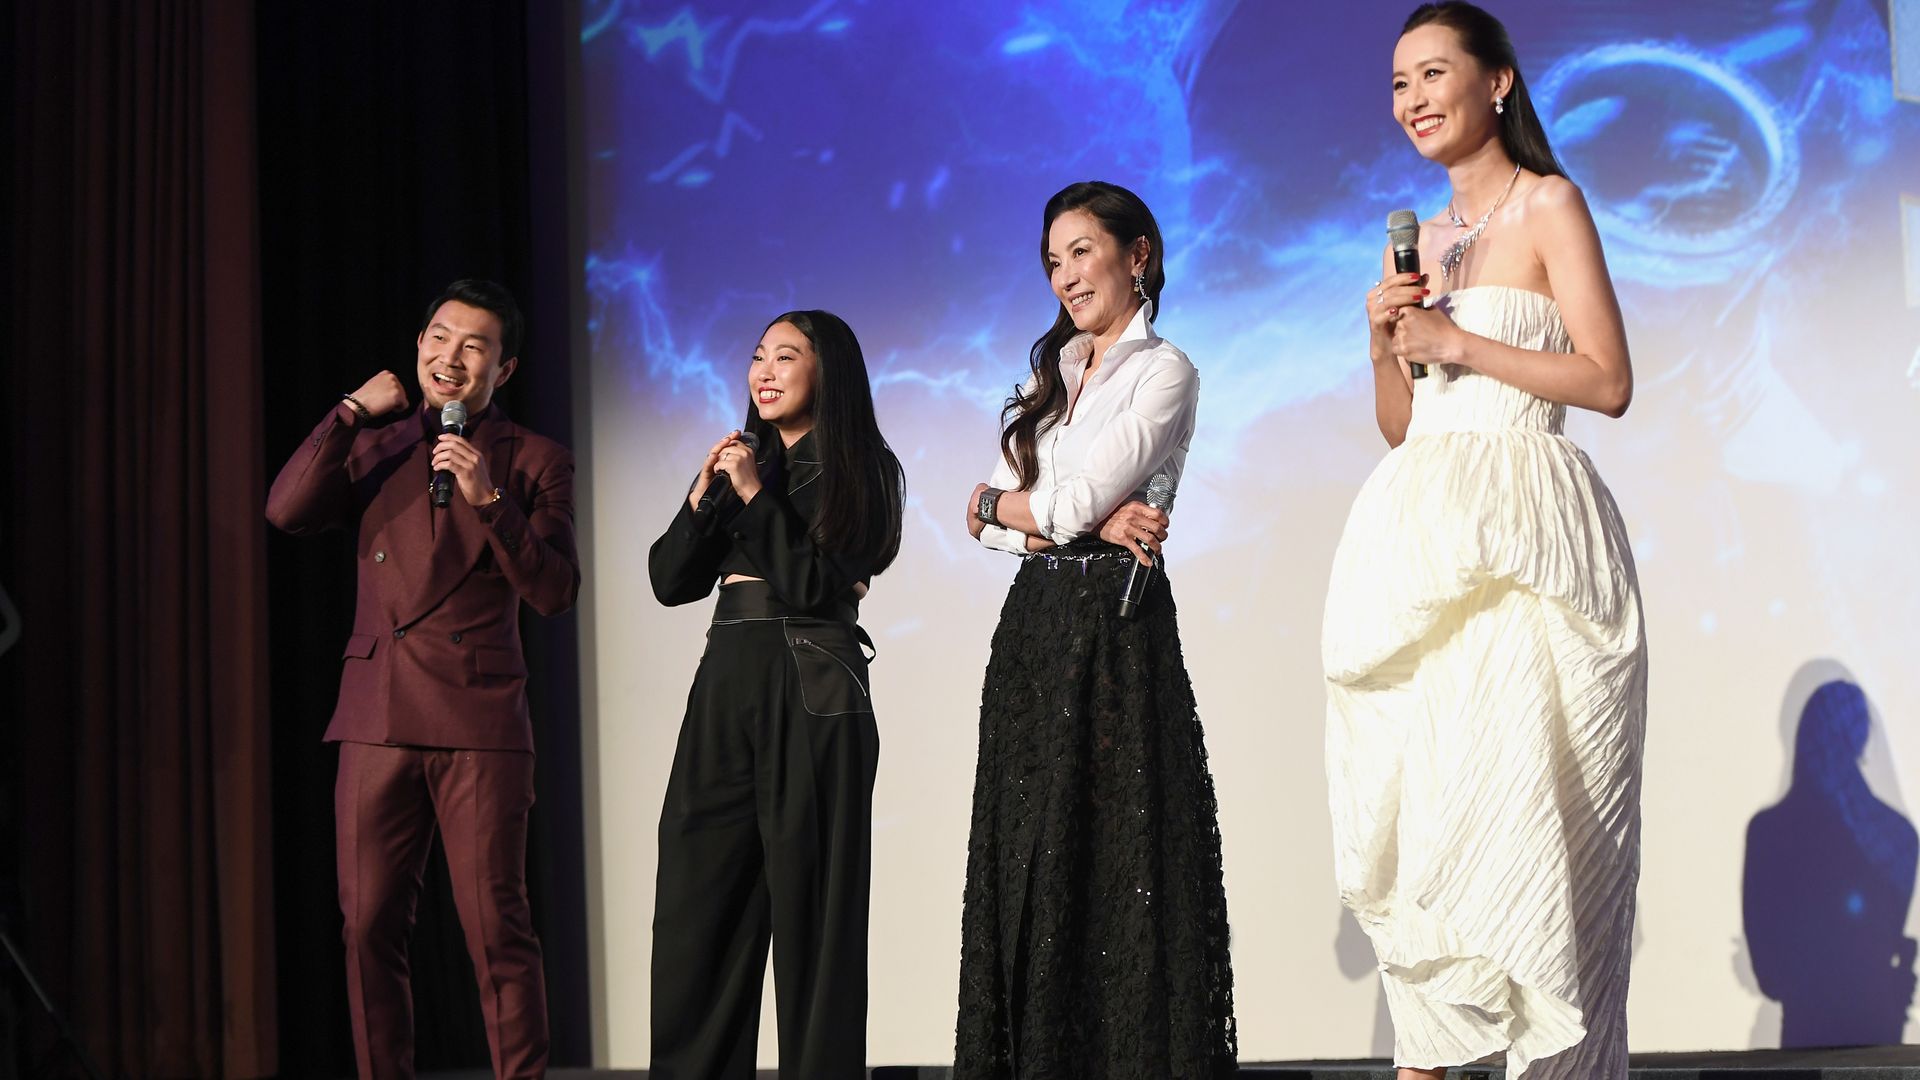 Simu Liu, Awkwafina, Michelle Yeoh and Fala Chen on stage at the "Shang-Chi and the Legend of the Ten Rings" UK Gala Screening at Curzon Cinema Mayfair on August 26, 2021 in London, England. 